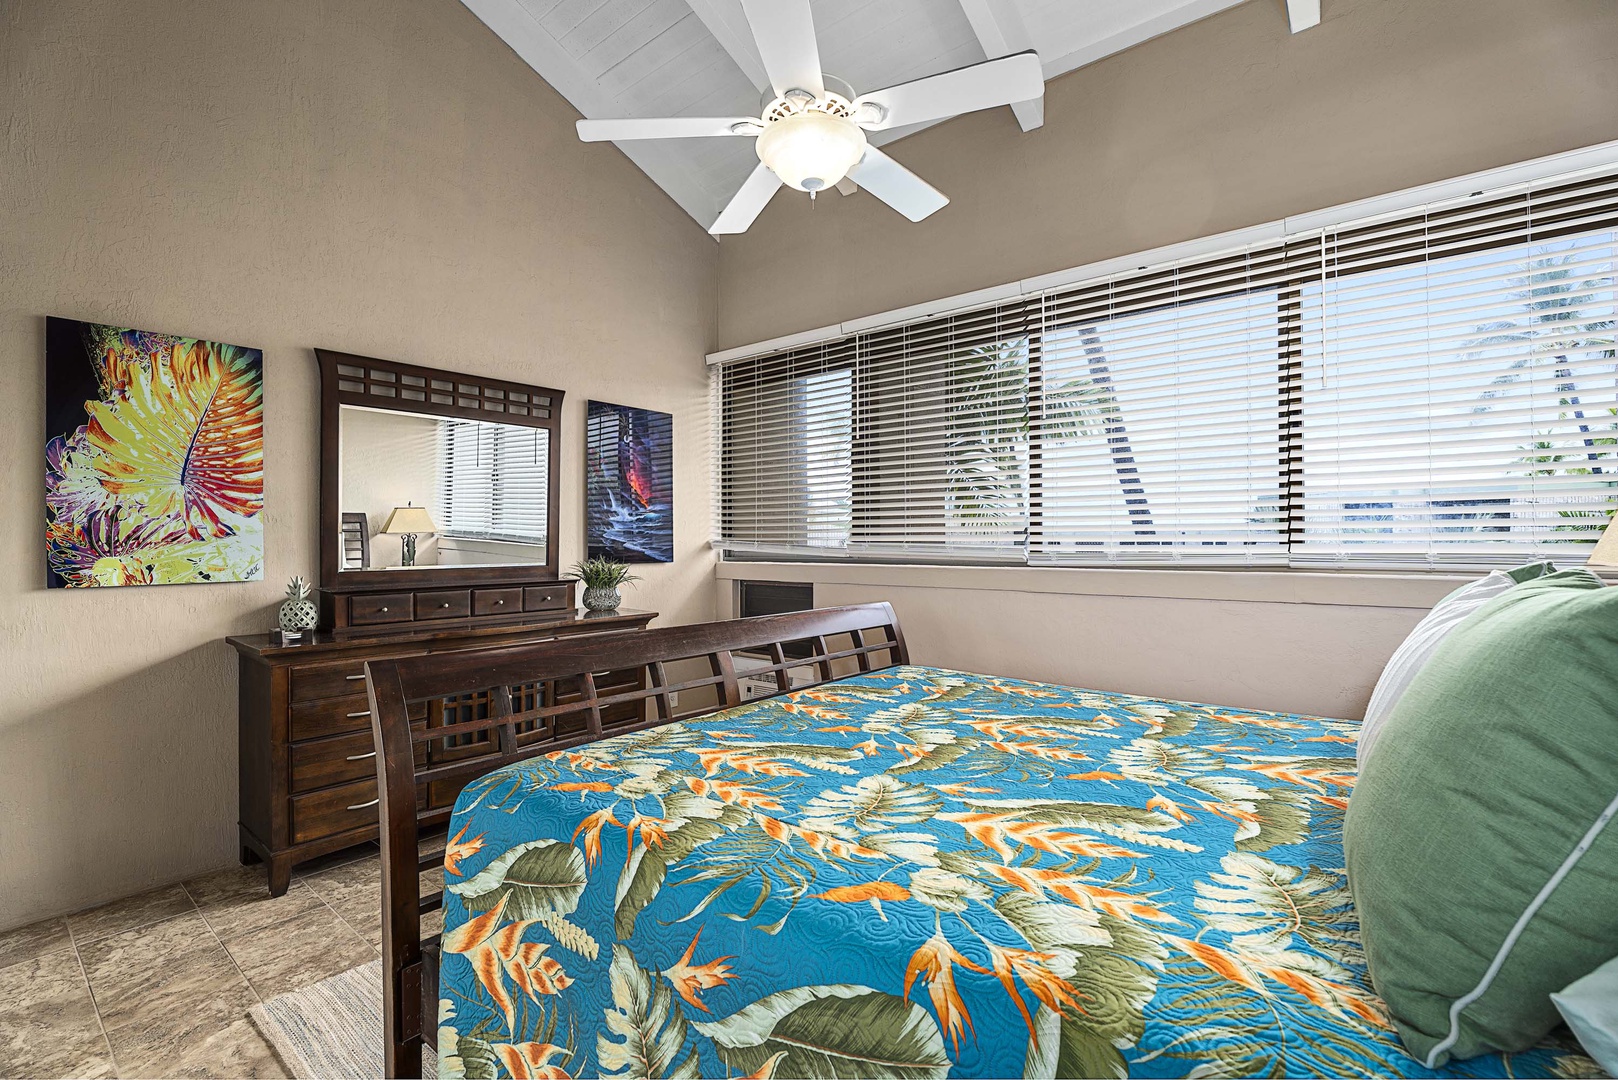 Kailua Kona Vacation Rentals, Kona Makai 6303 - The Primary Bedroom has a king-sized bed, a large dresser and a large window allows you to awake to ocean views and fresh tropical breezes every morning.